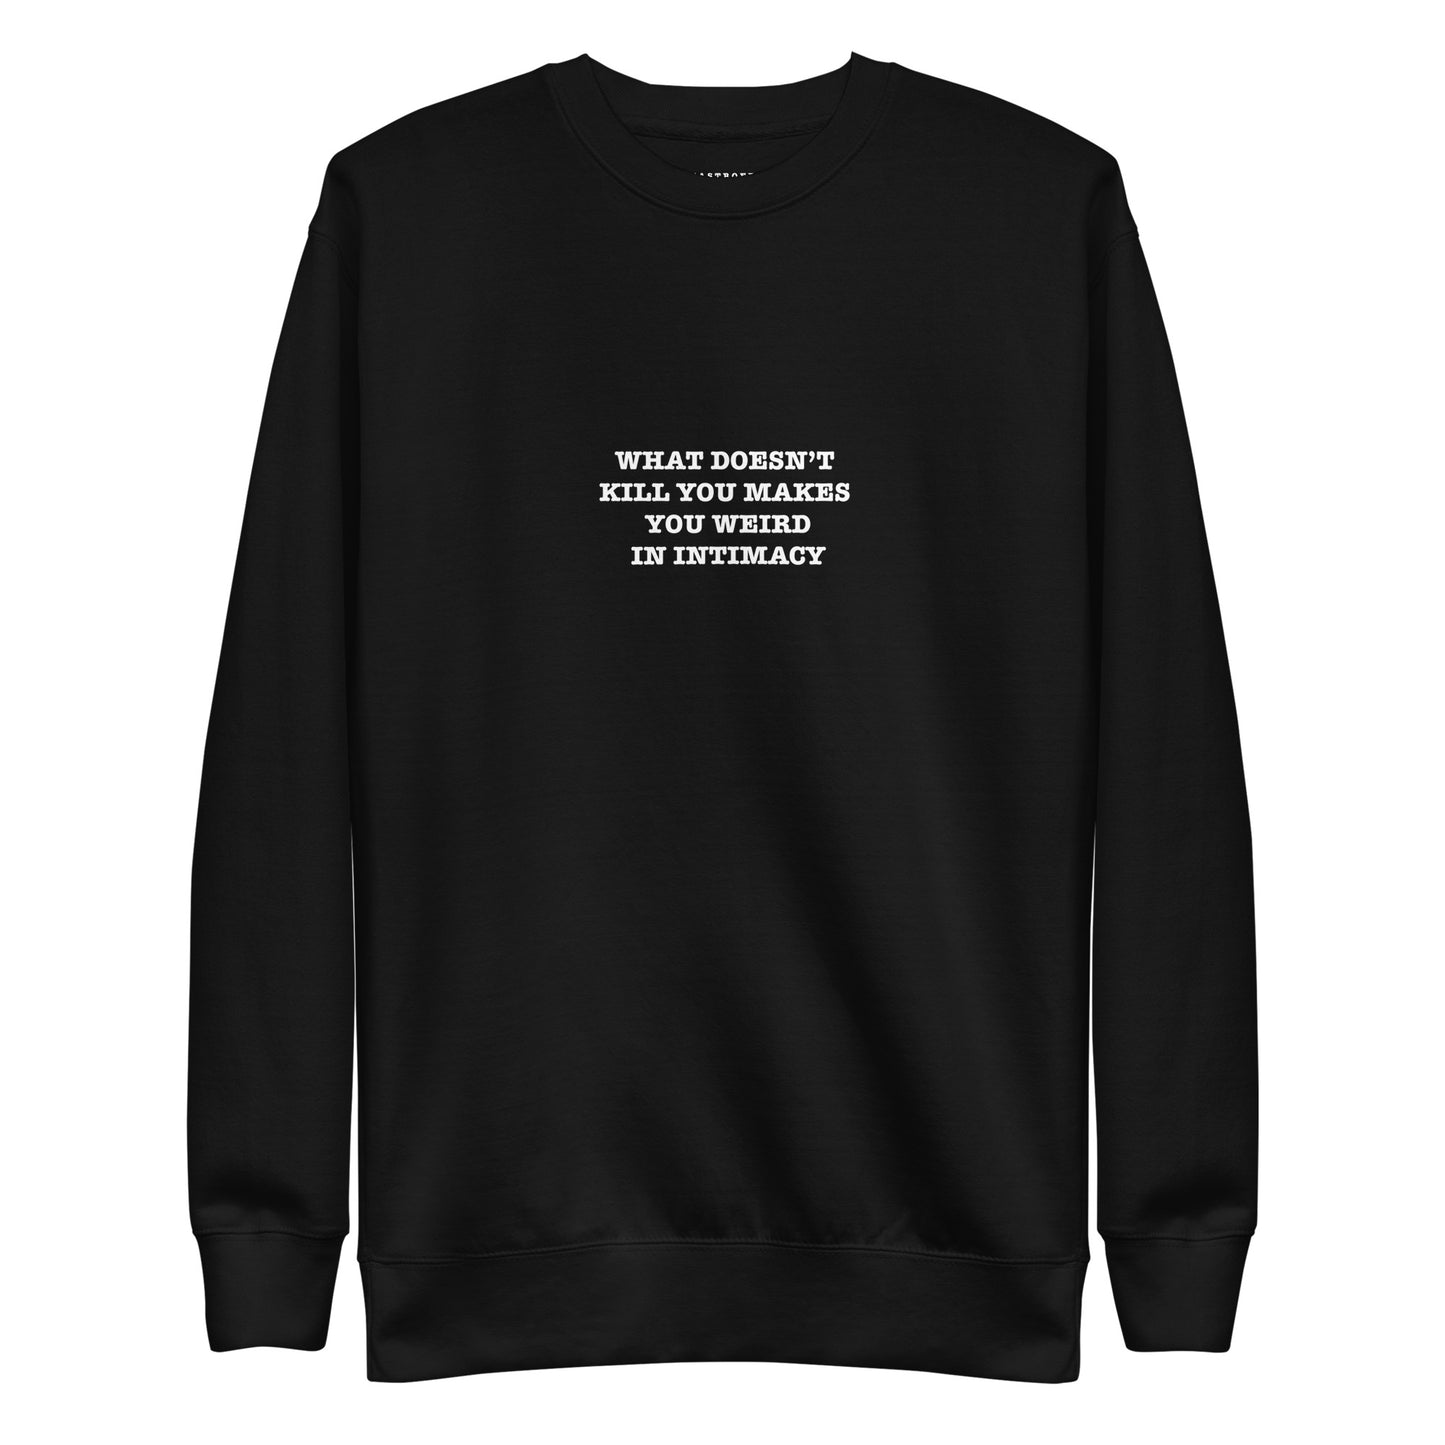 WHAT DOESN'T KILL YOU MAKES YOU WEIRD IN INTIMACY KATASTROFFFE Unisex Premium Sweatshirt